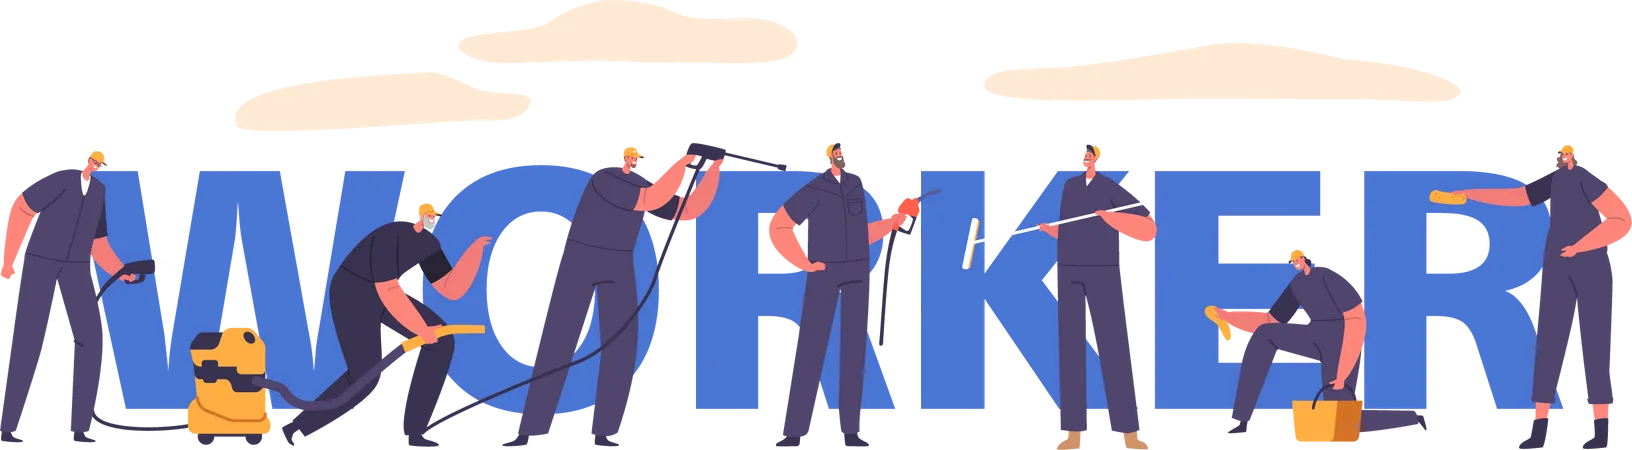 Workers Concept Skilled Artisans And Laborers Armed With Their Instruments Crafting Building And Shaping The World Around Them With Precision And Dedication Cartoon Vector Poster Banner Or Flyer Illustration